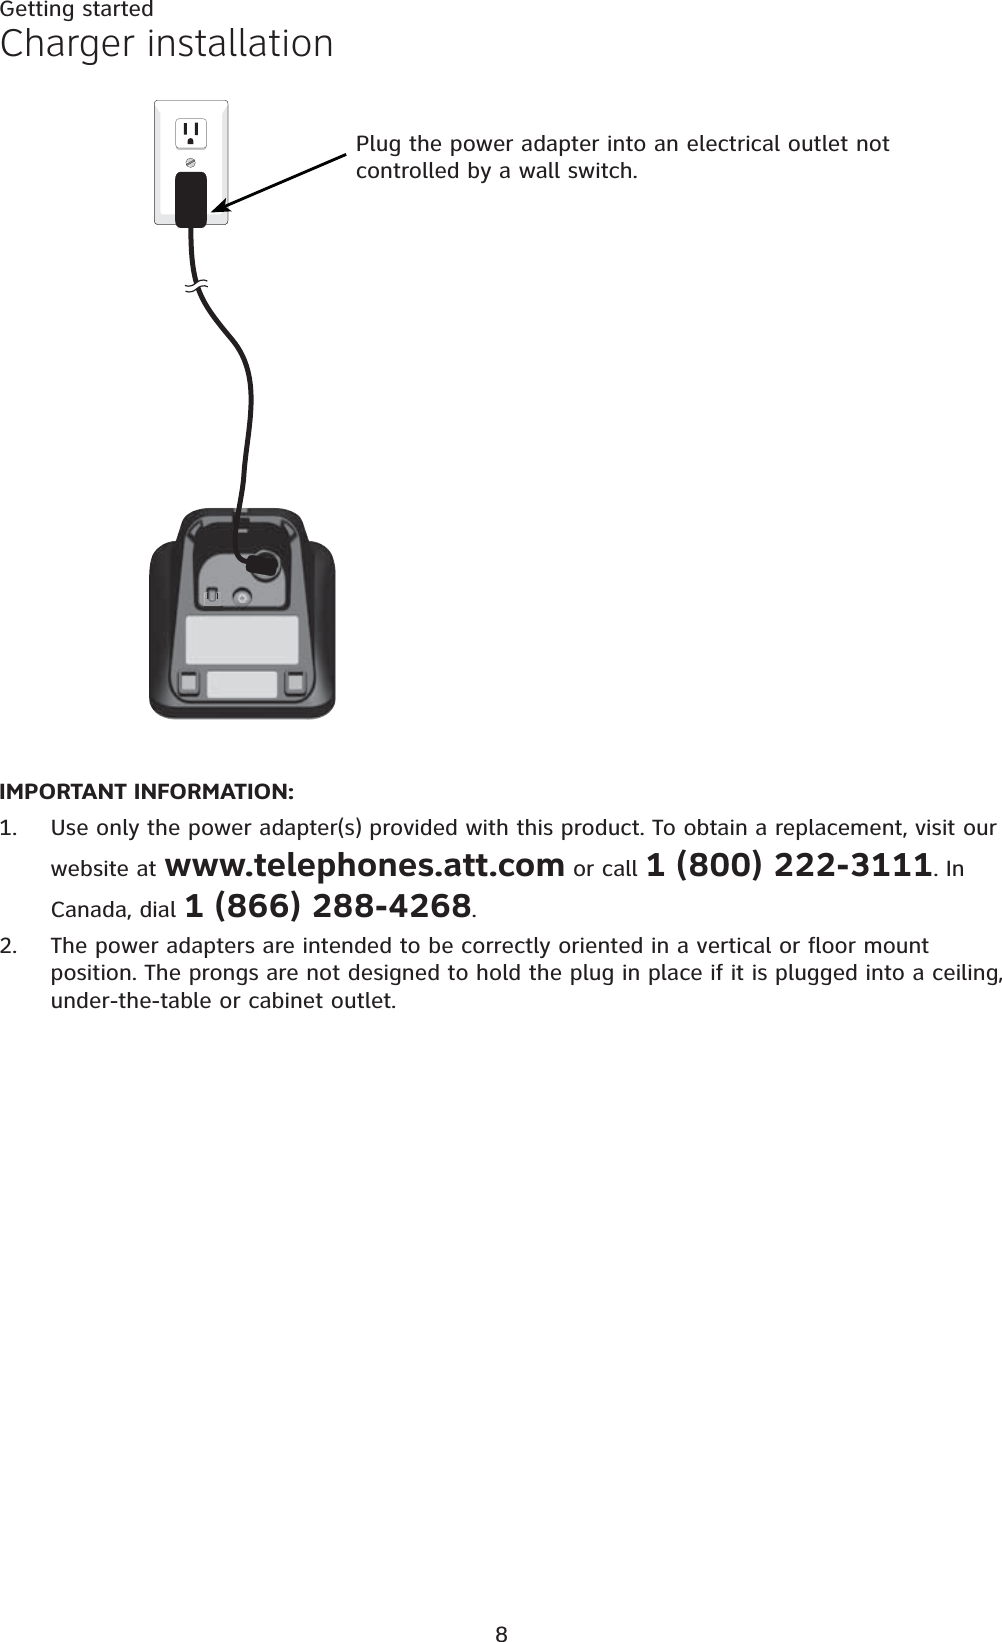 8Getting startedIMPORTANT INFORMATION:Use only the power adapter(s) provided with this product. To obtain a replacement, visit our website at www.telephones.att.com or call 1 (800) 222-3111. In Canada, dial 1 (866) 288-4268.The power adapters are intended to be correctly oriented in a vertical or floor mount position. The prongs are not designed to hold the plug in place if it is plugged into a ceiling, under-the-table or cabinet outlet.1.2.Charger installationPlug the power adapter into an electrical outlet not controlled by a wall switch.